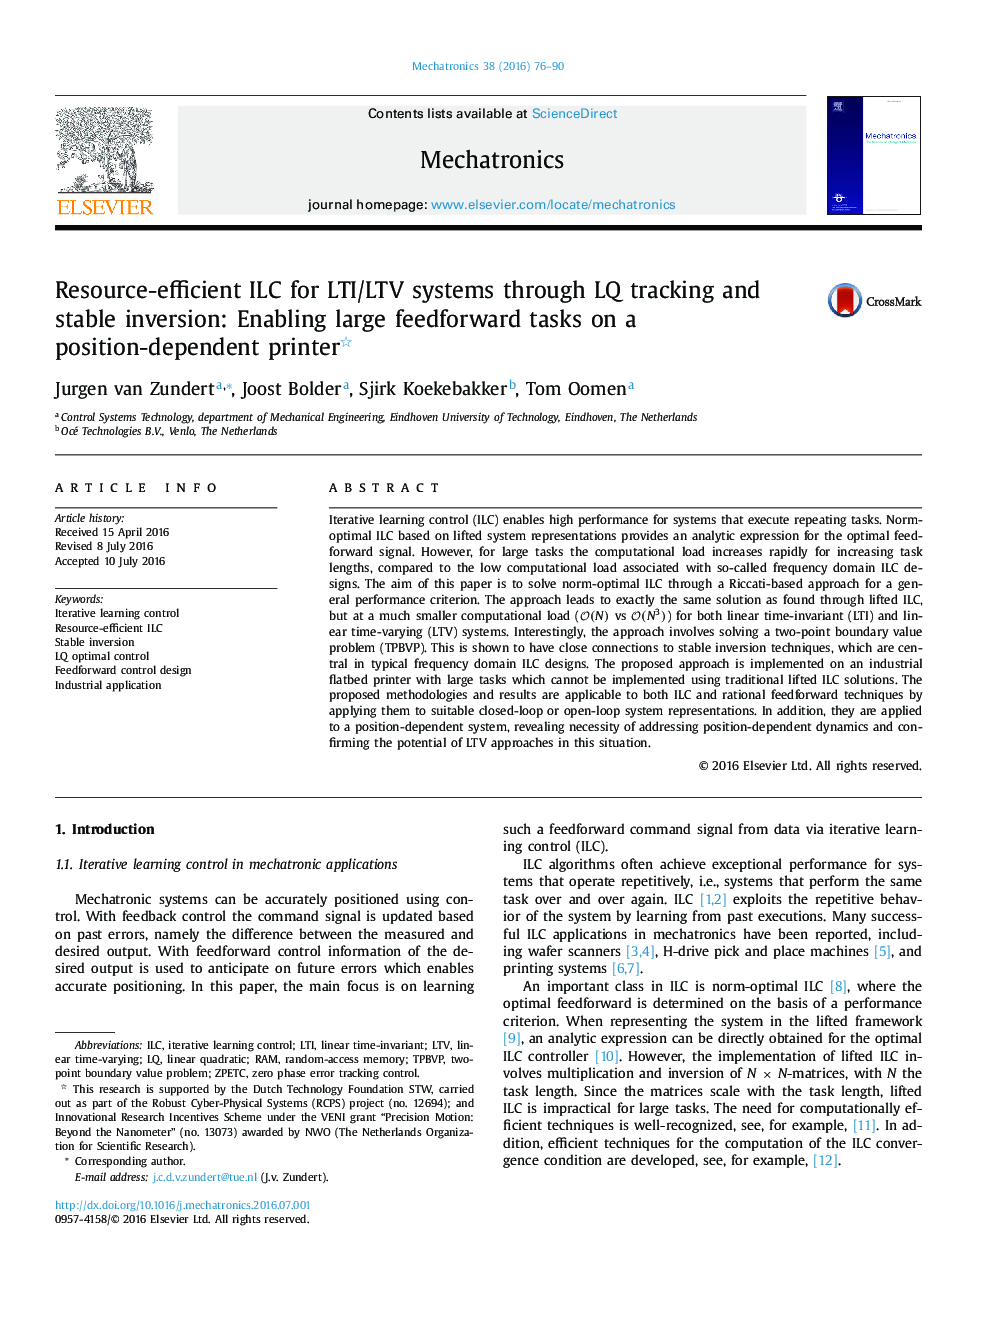 Resource-efficient ILC for LTI/LTV systems through LQ tracking and stable inversion: Enabling large feedforward tasks on a position-dependent printer 